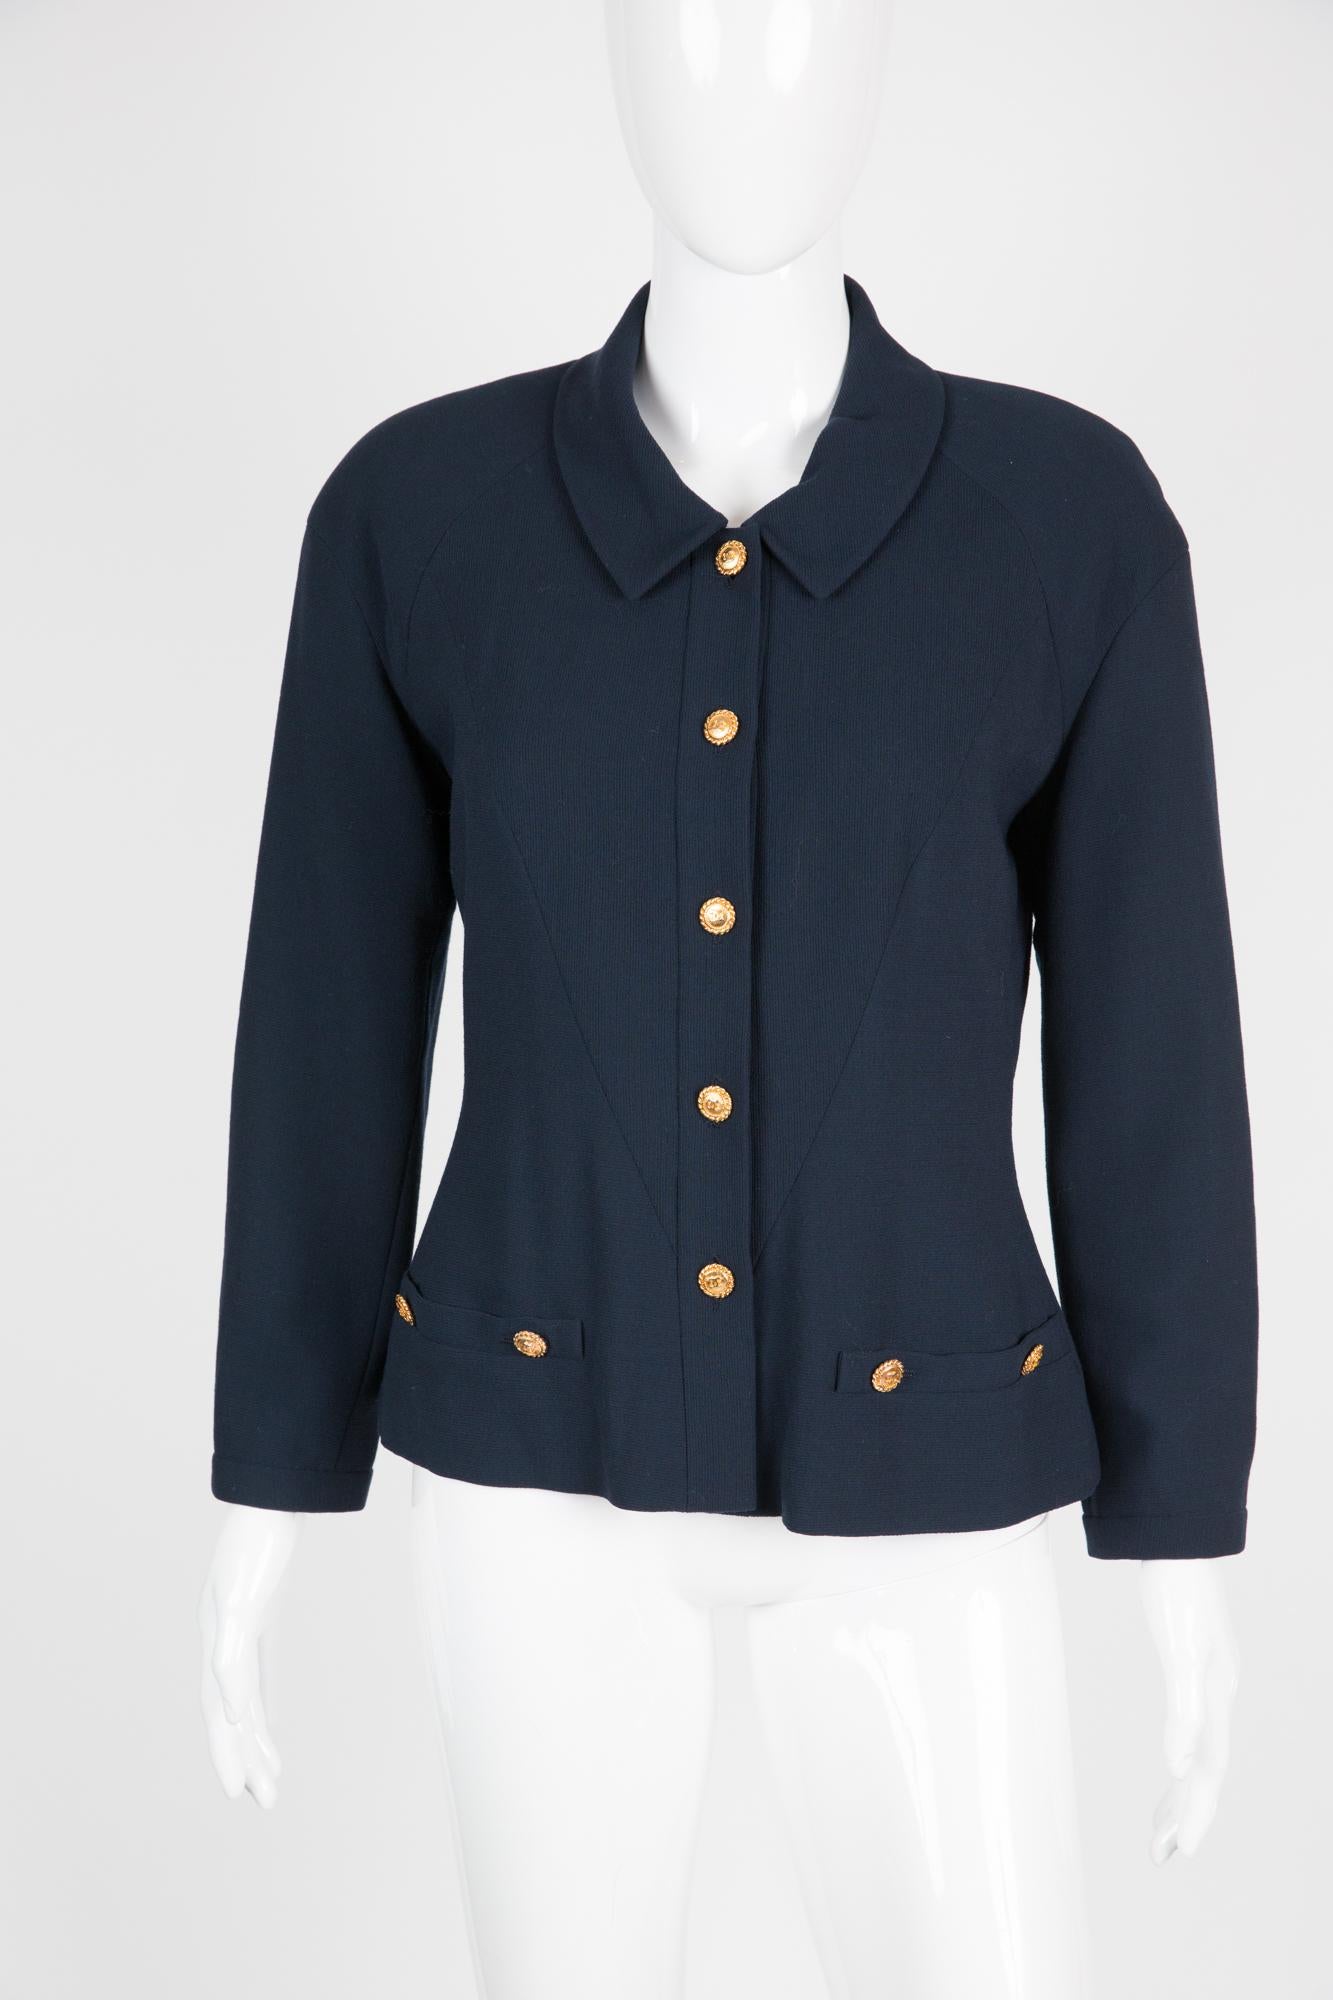 Chanel navy wool  jacket featuring low armhole, front logo buttons, long sleeves with logo buttons, a silk lining, 
Composition: 100% wool
In excellent vintage condition. Made in France.
Estimated size 38fr/US6 /UK10 // 40fr/US8/UK12
We guarantee